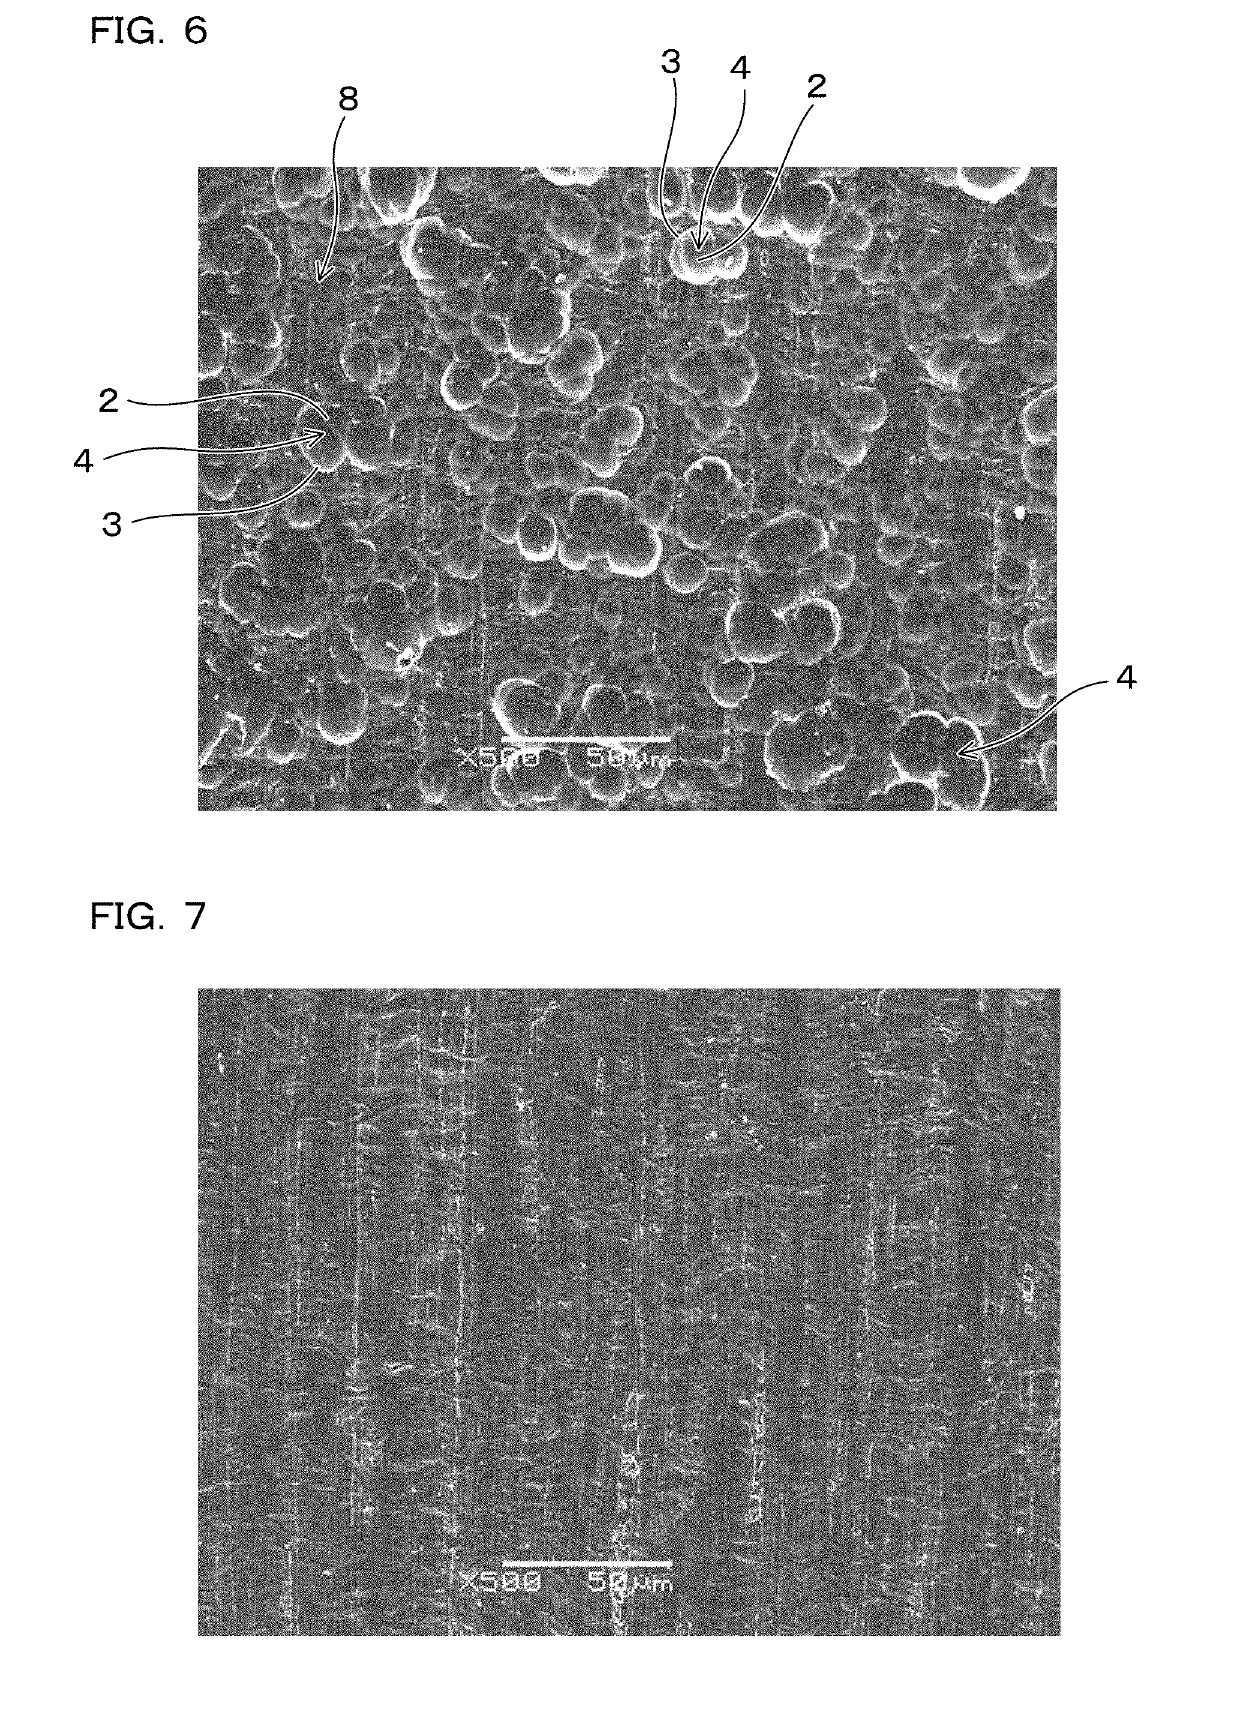 Current-collector metal foil, current collector, and current-collector-metal-foil manufacturing method